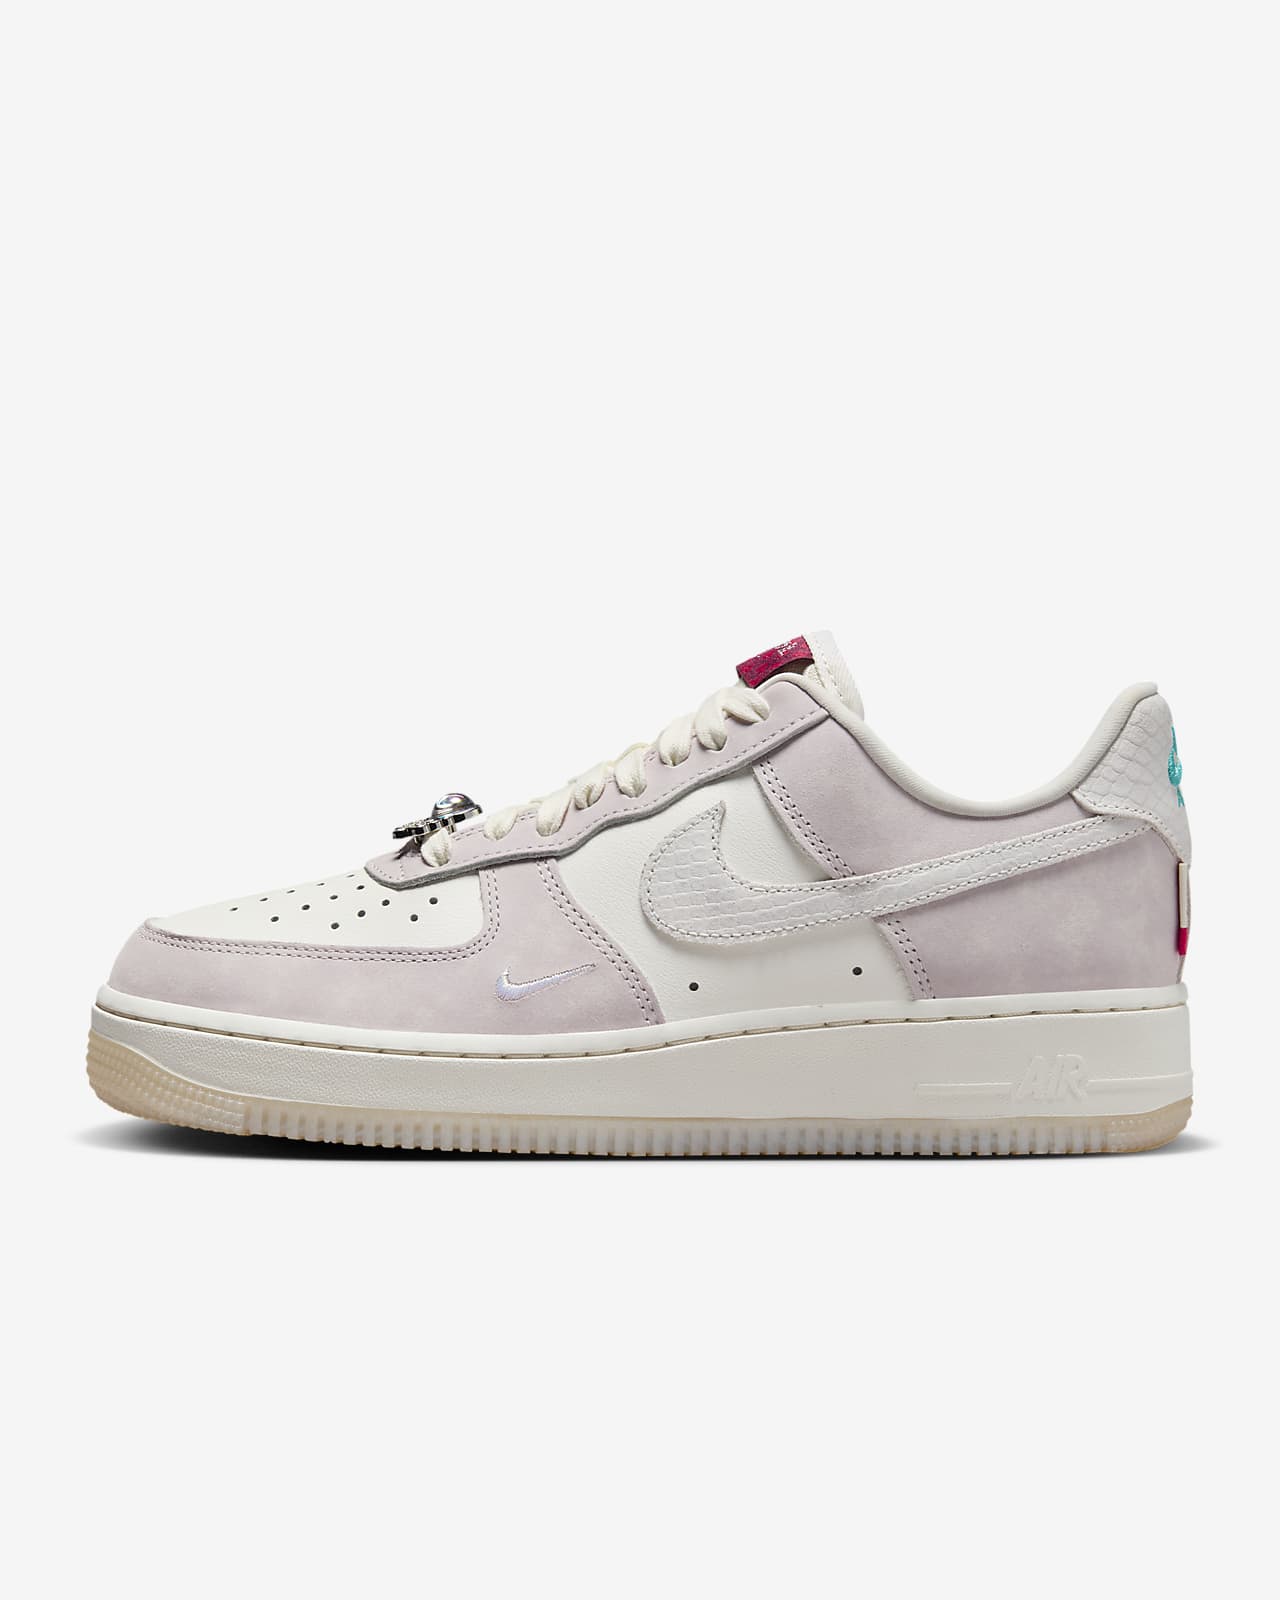 AirForceNIKE WMNS AIR FORCE 1 '07 LX